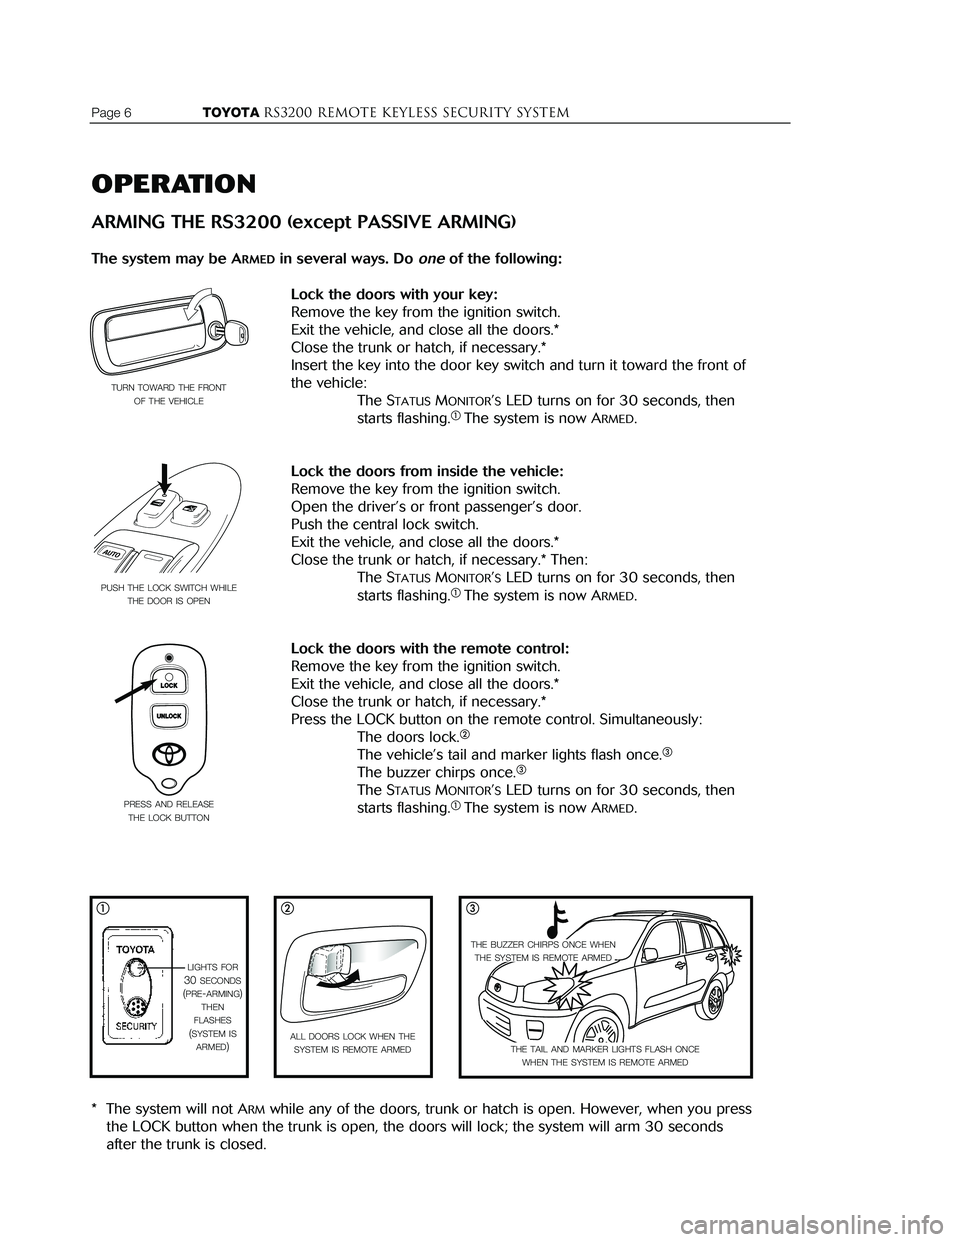 TOYOTA TACOMA 2002  Accessories, Audio & Navigation (in English) Page 6                  TOYOTARS3200 REMOTE KEYLESS Security systemTOYOTARS3200 remote keyless Security systemPage 15
OPERATION
ARMING THE RS3200 (except PASSIVE ARMING)
The system may be ARMEDin seve